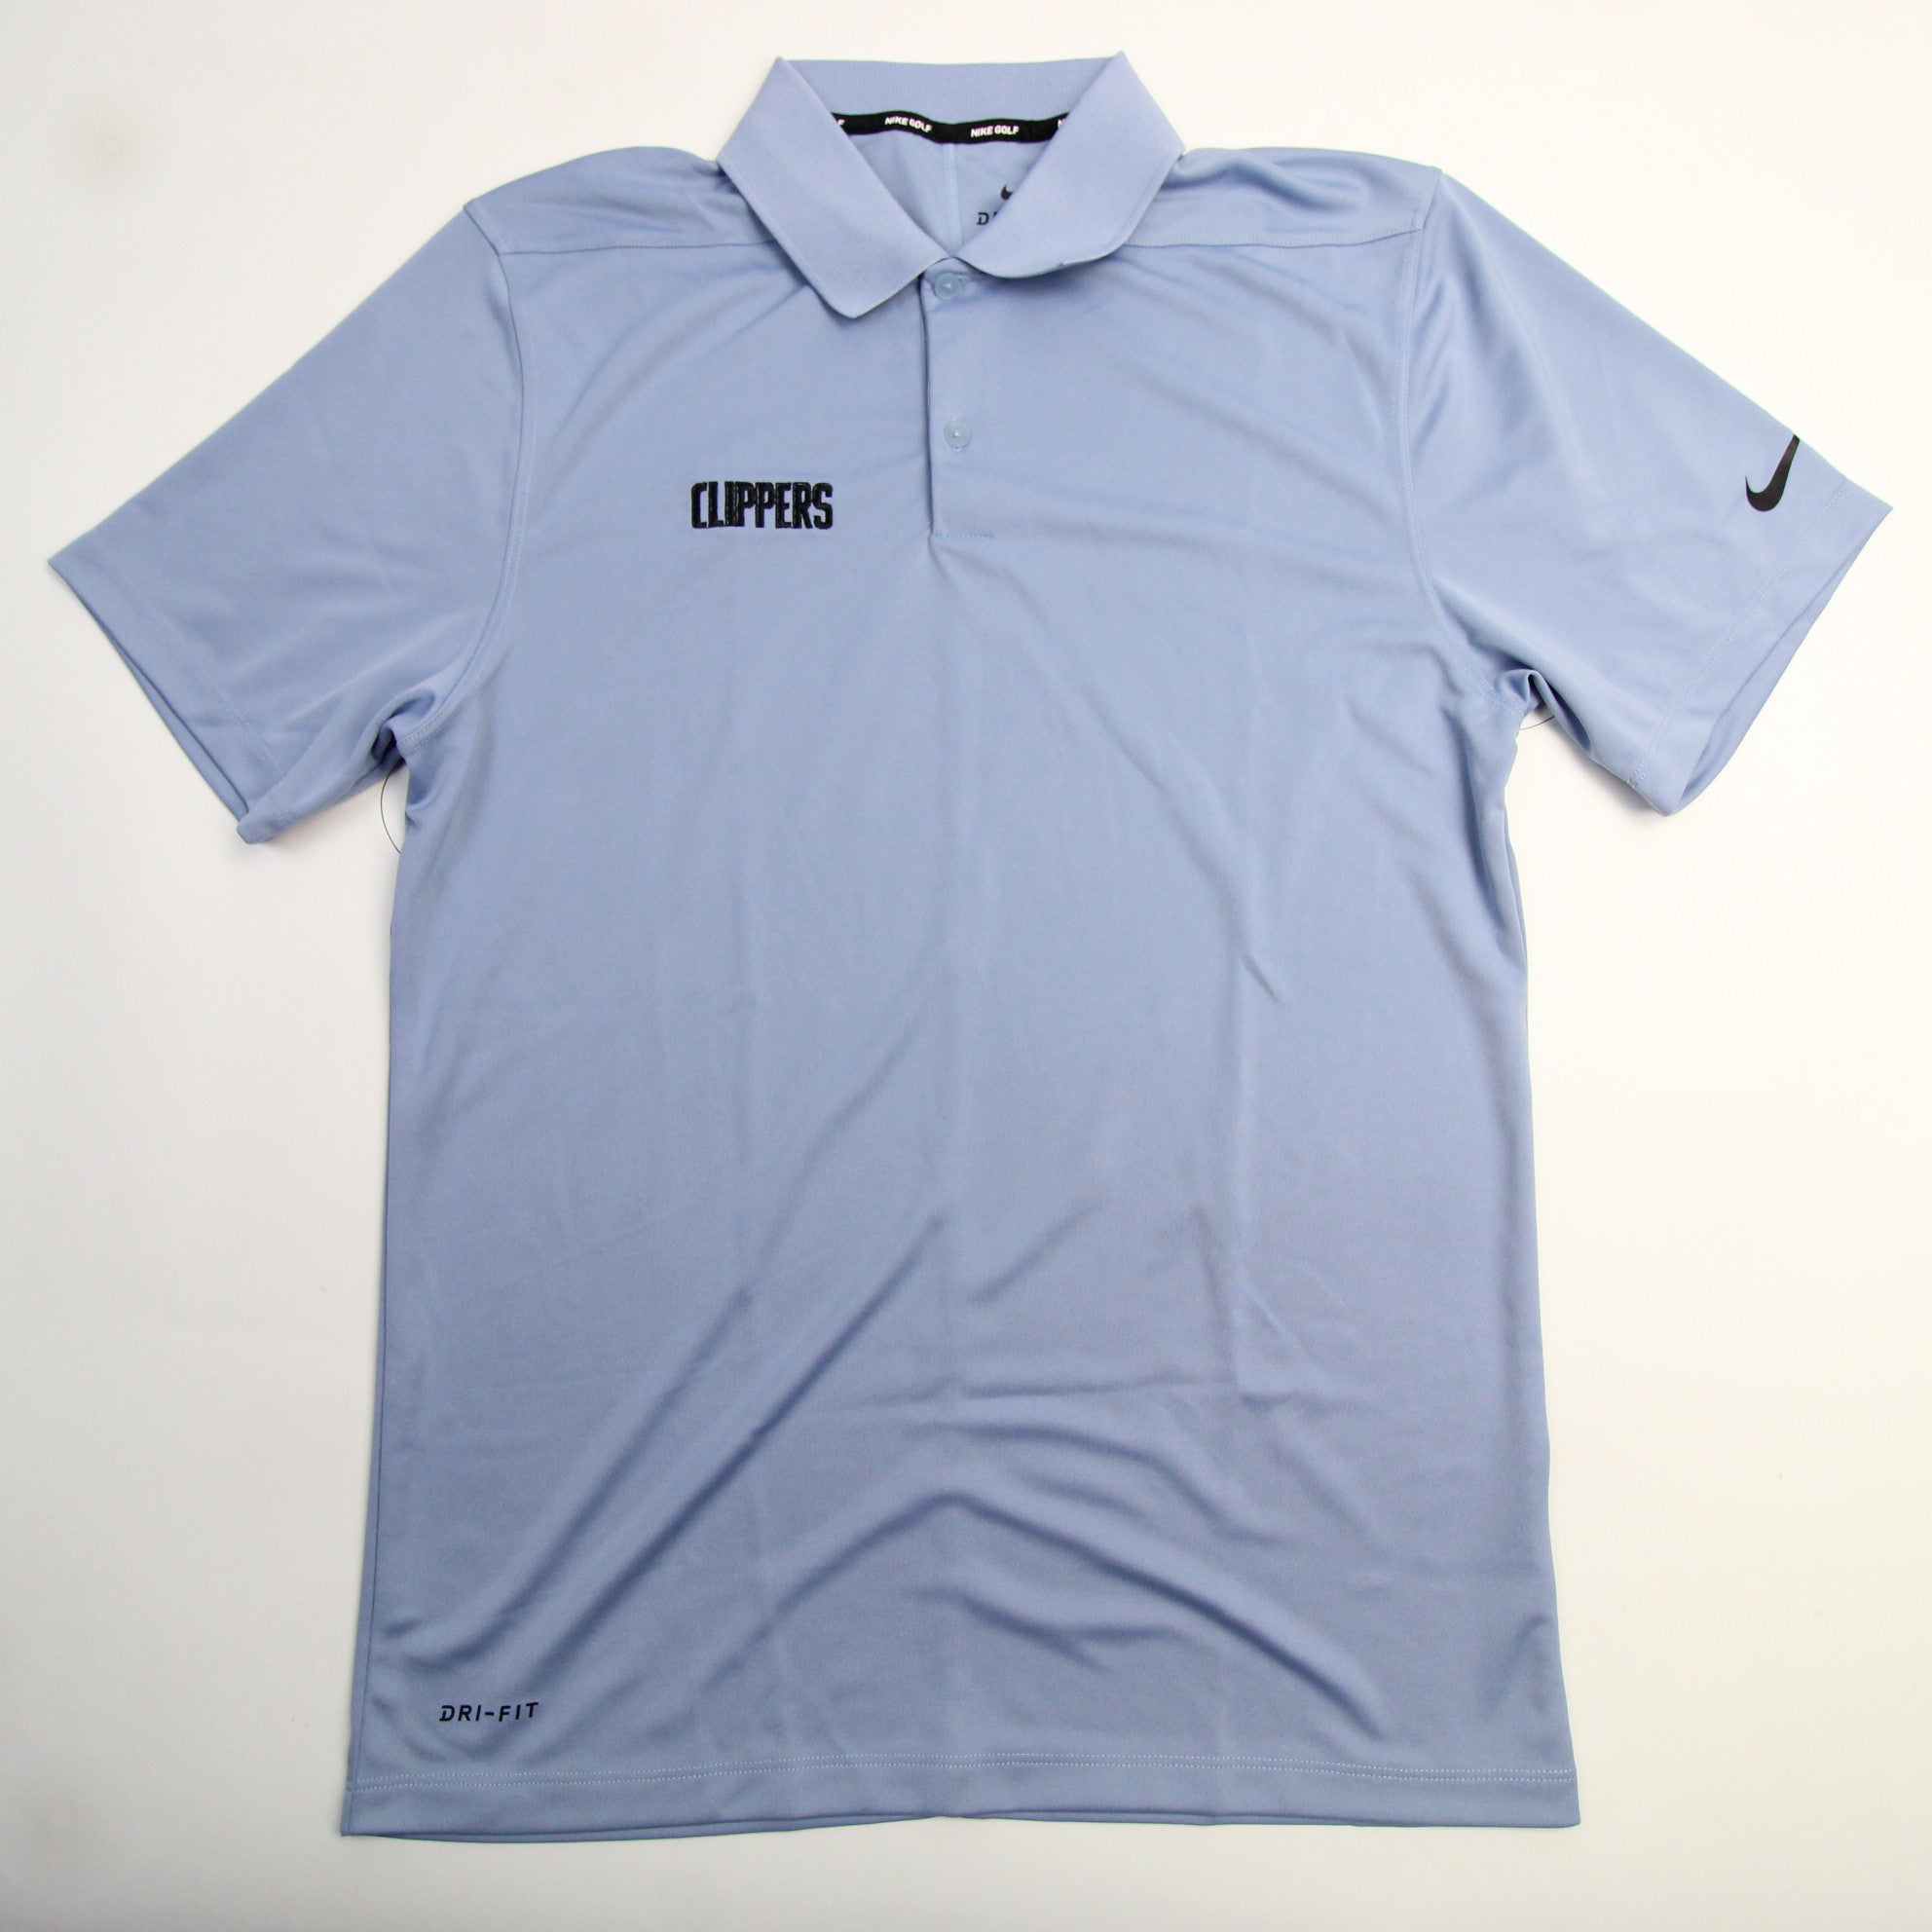 Los Angeles Clippers Nike Golf Dri-Fit Polo Men's Light Blue New S